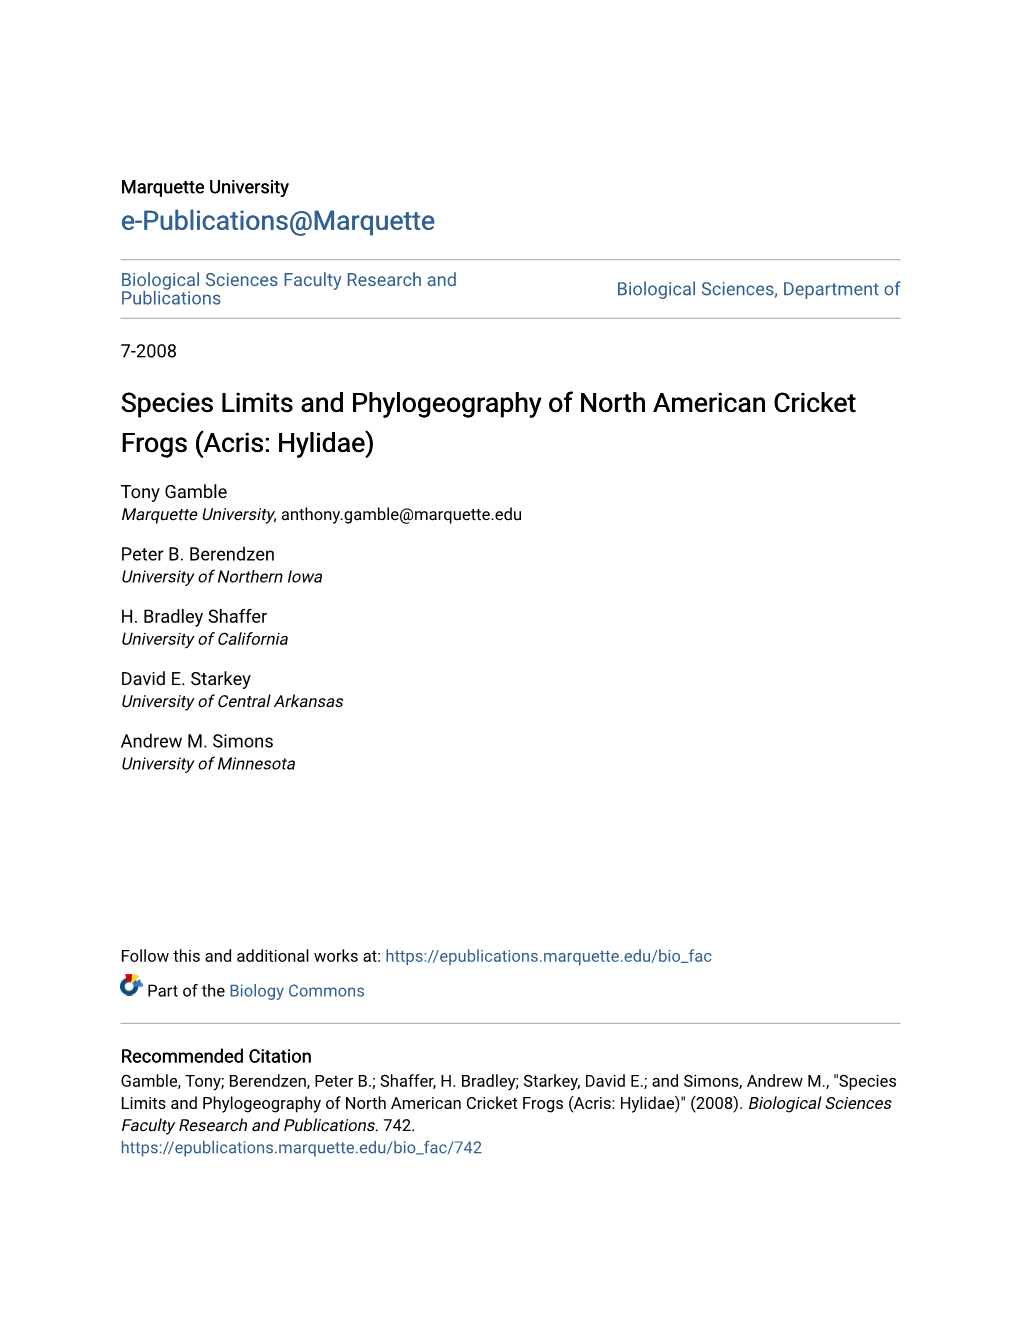 Species Limits and Phylogeography of North American Cricket Frogs (Acris: Hylidae)